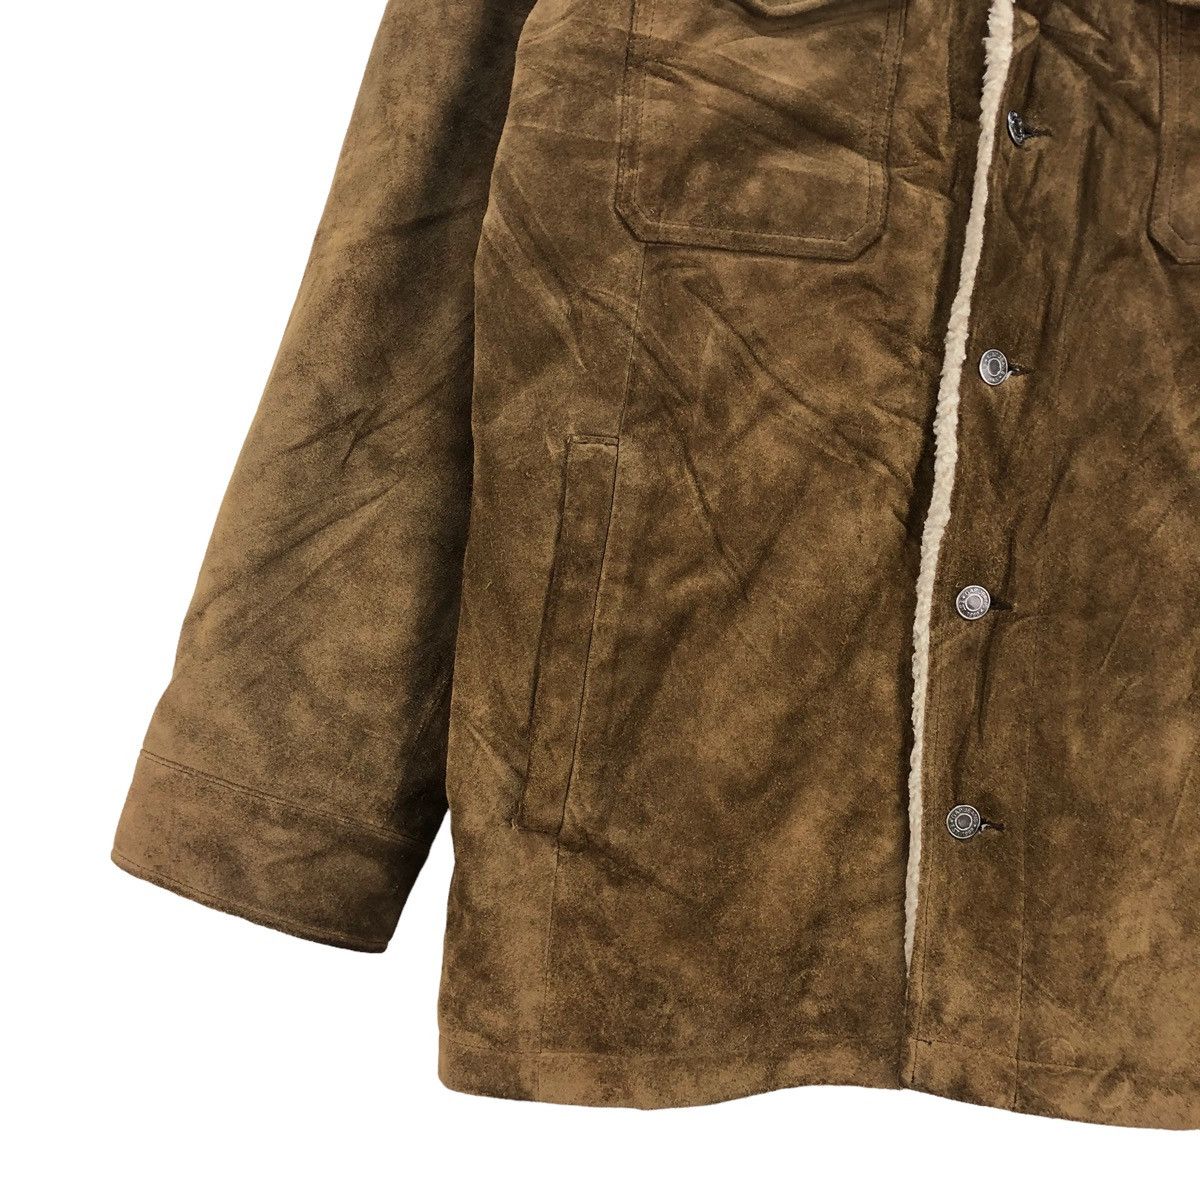 Genuine Leather - Gap Suede Leather Sherpa Jacket - 5